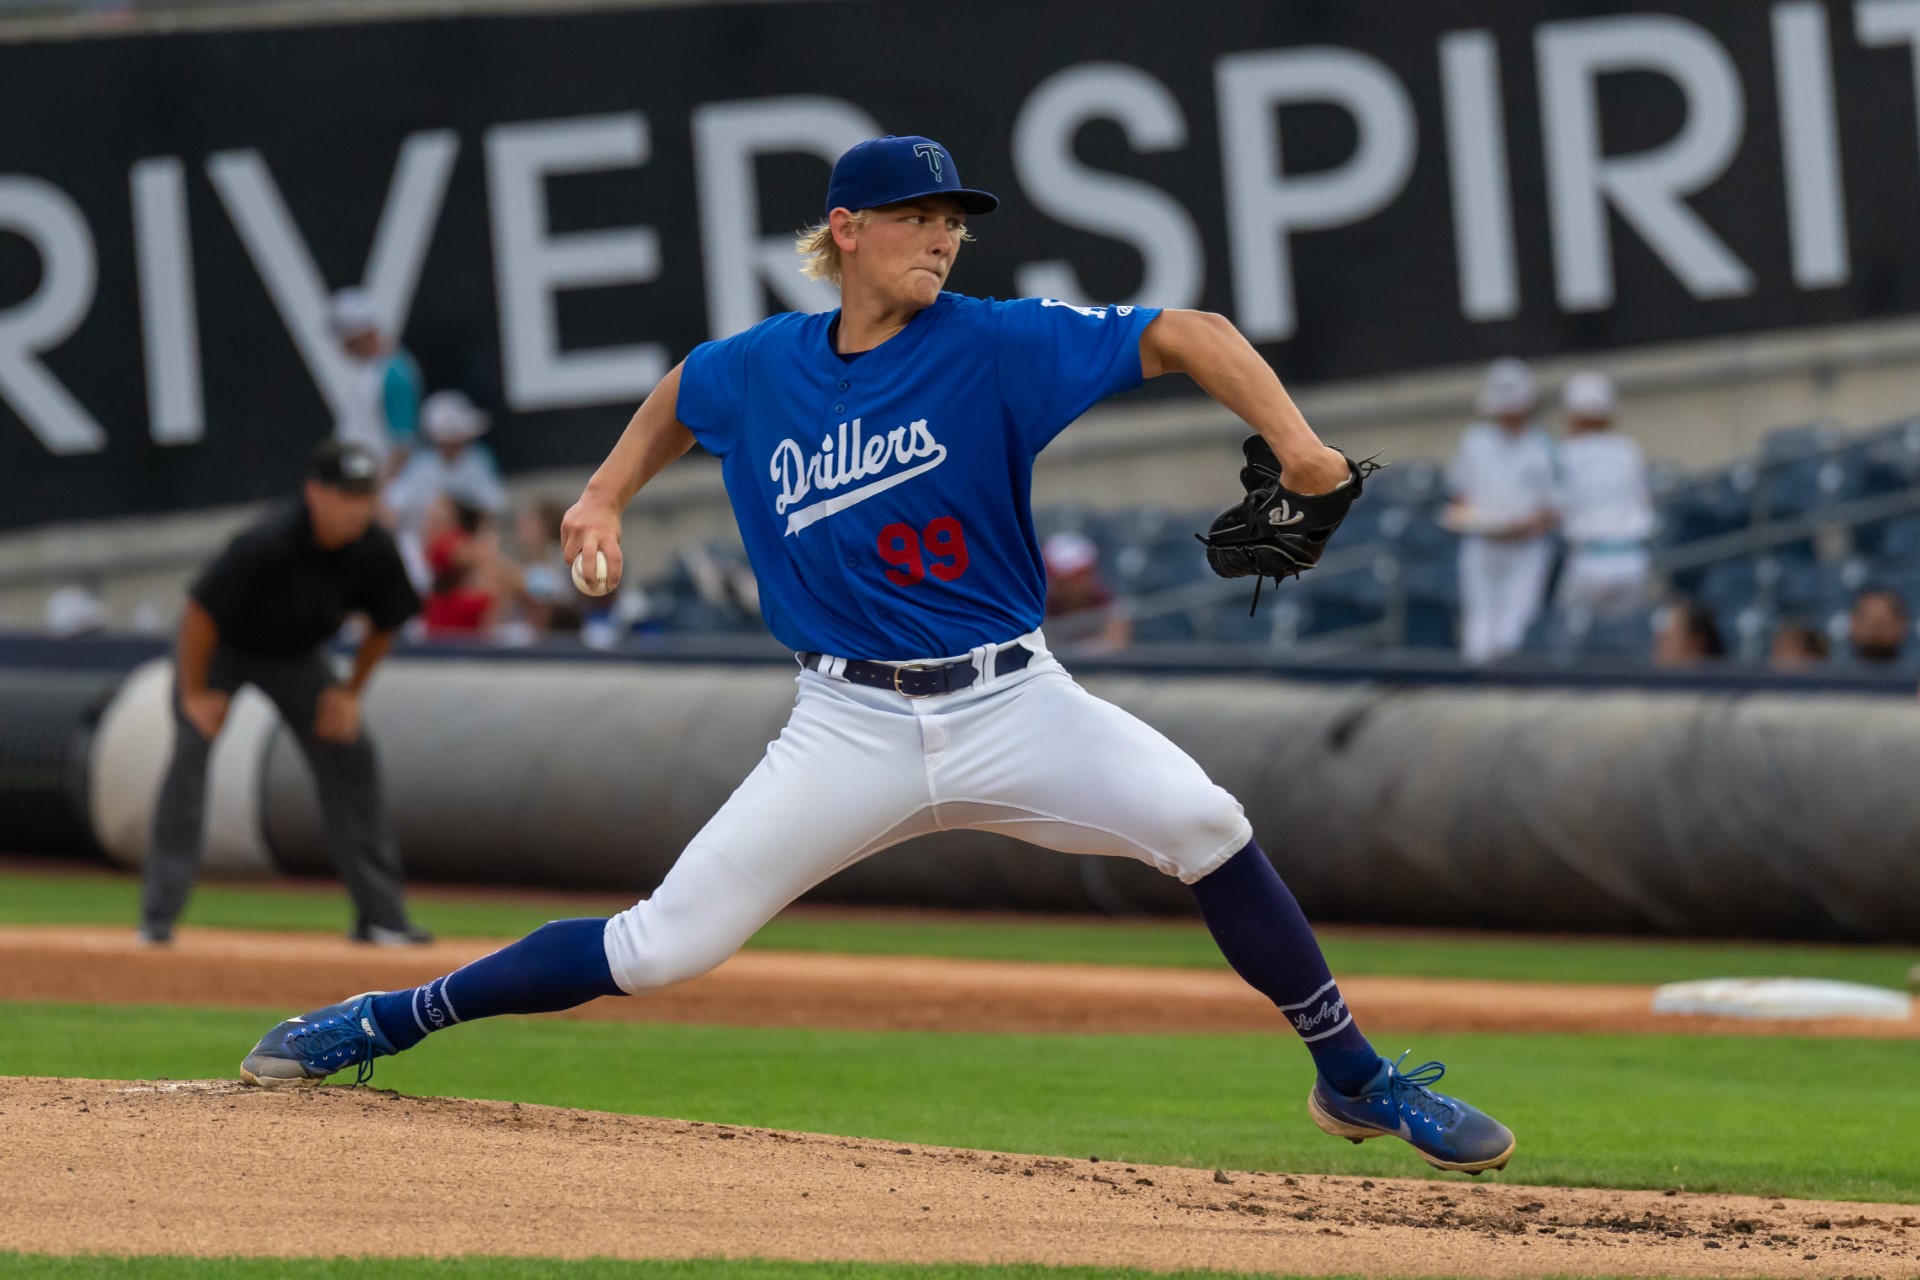 Texas League All-Star Game filled with Drillers